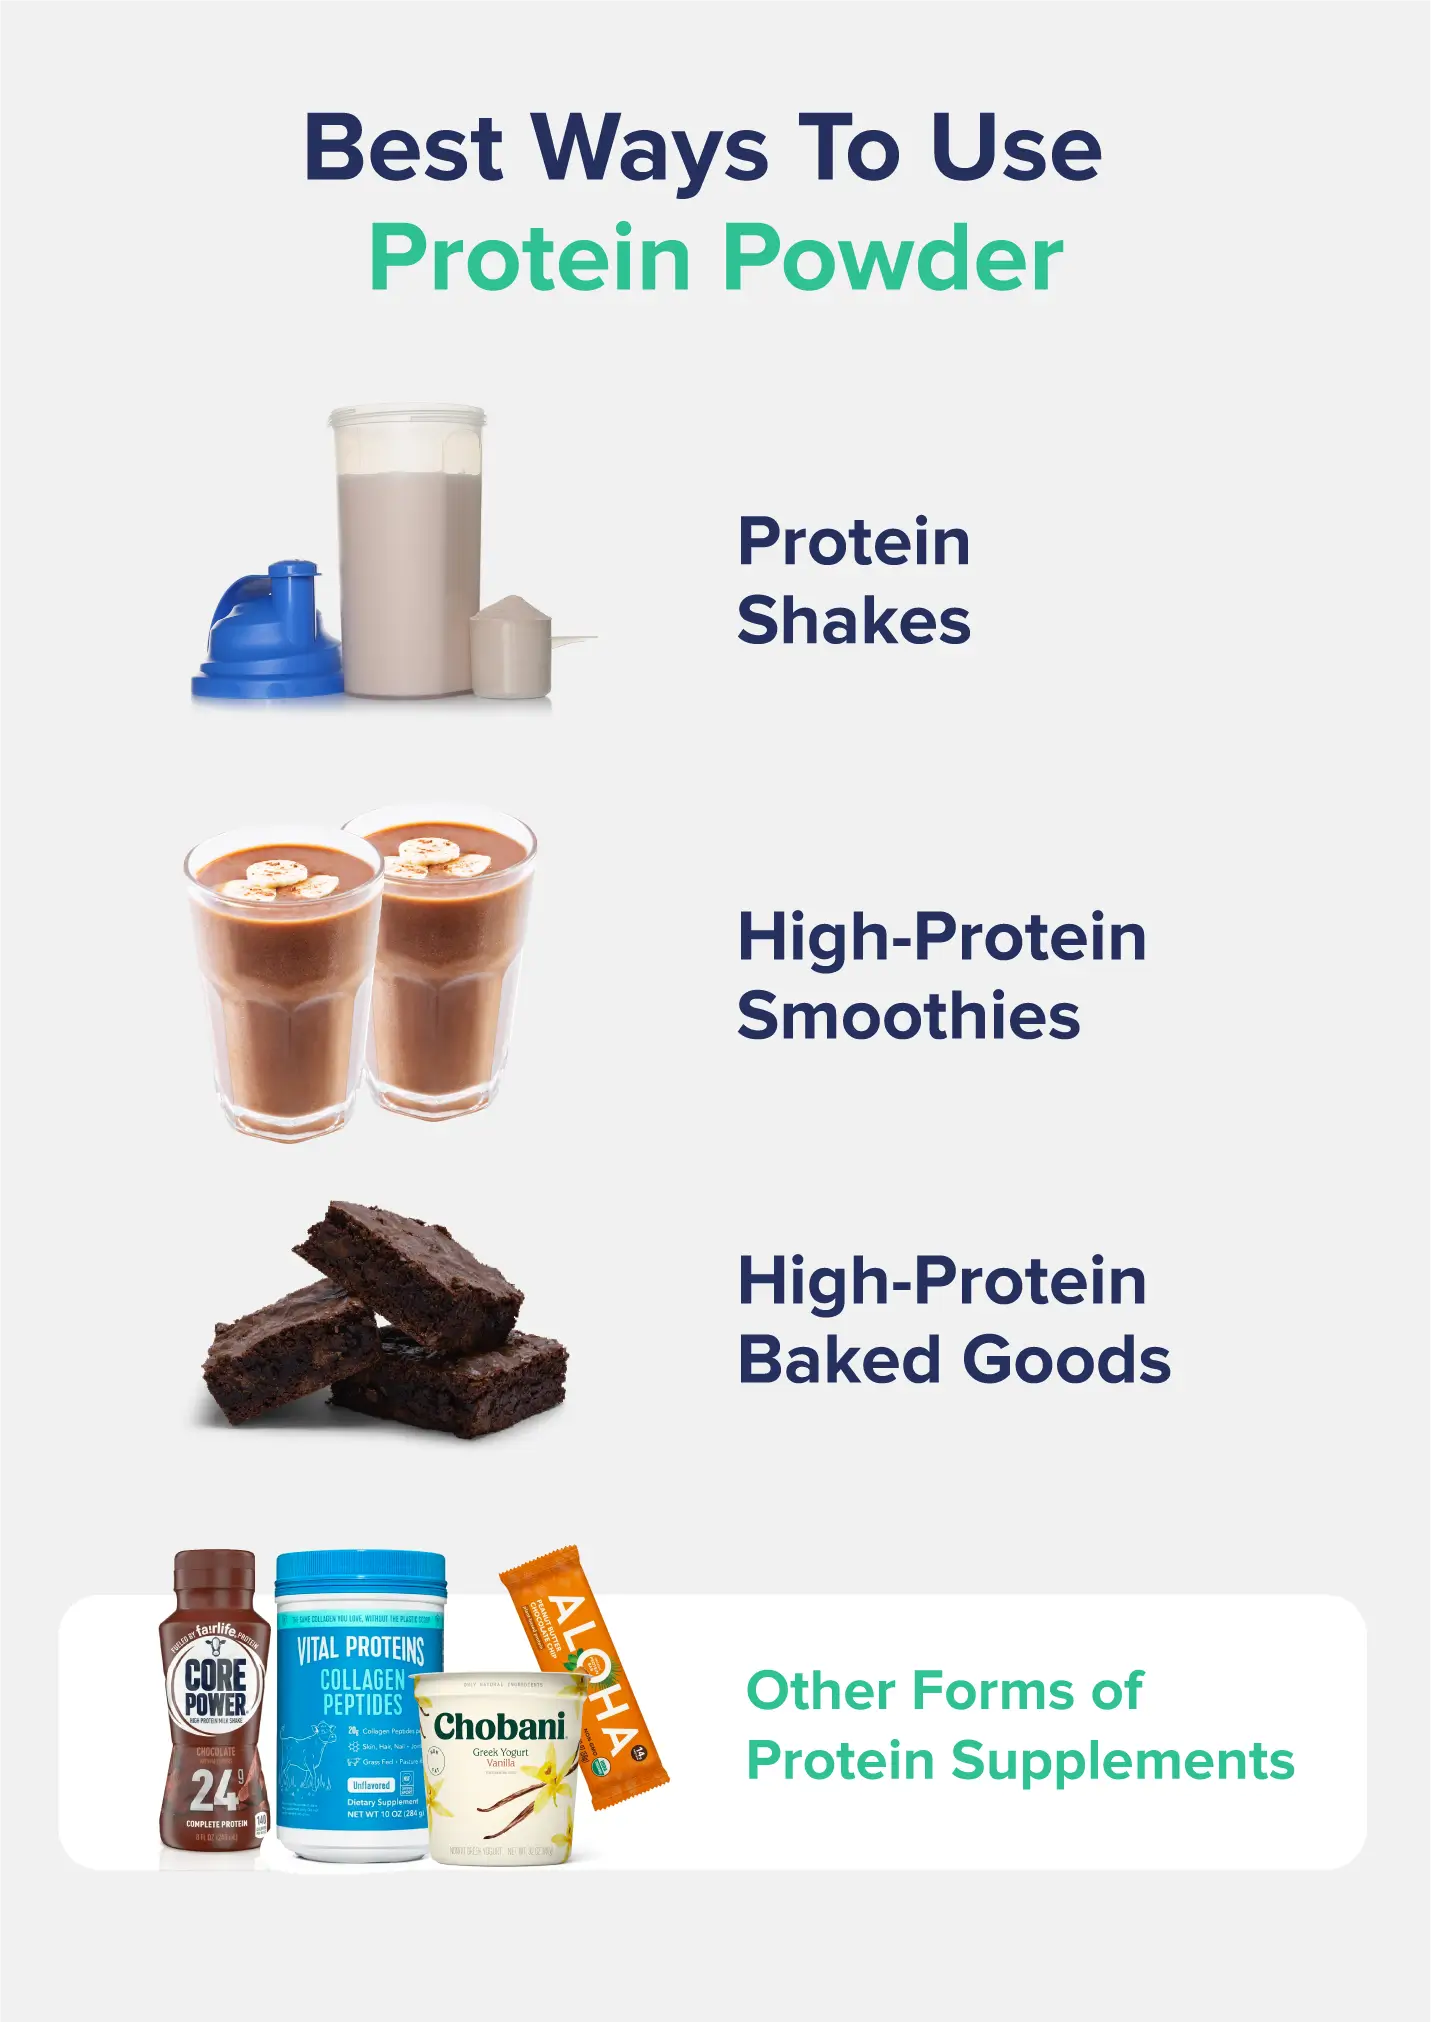 A graphic entitled "Best Ways To Use Protein Powder" showing labeled images of protein shakes, high-protein smoothies, high-protein baked goods, and more. 